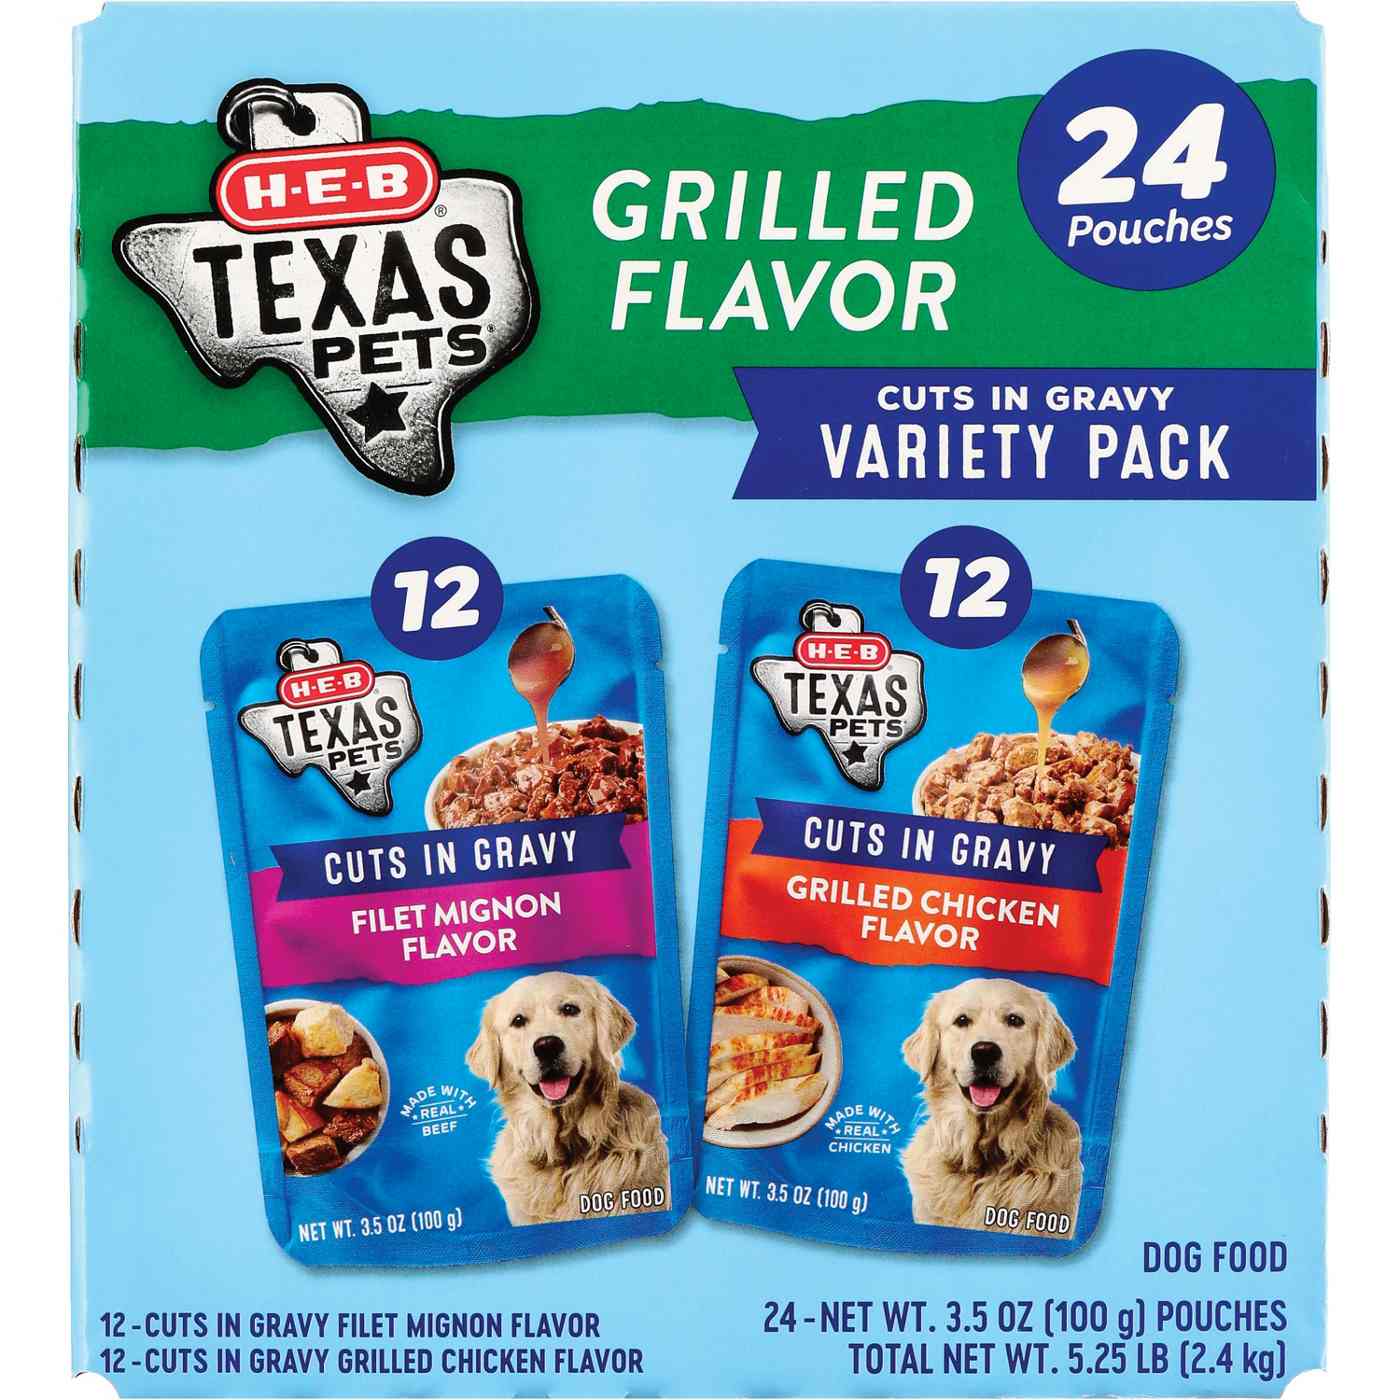 H-E-B Texas Pets Cuts in Gravy Wet Dog Food Pouches Grilled Flavor Variety Pack – Chicken & Filet Mignon; image 1 of 2